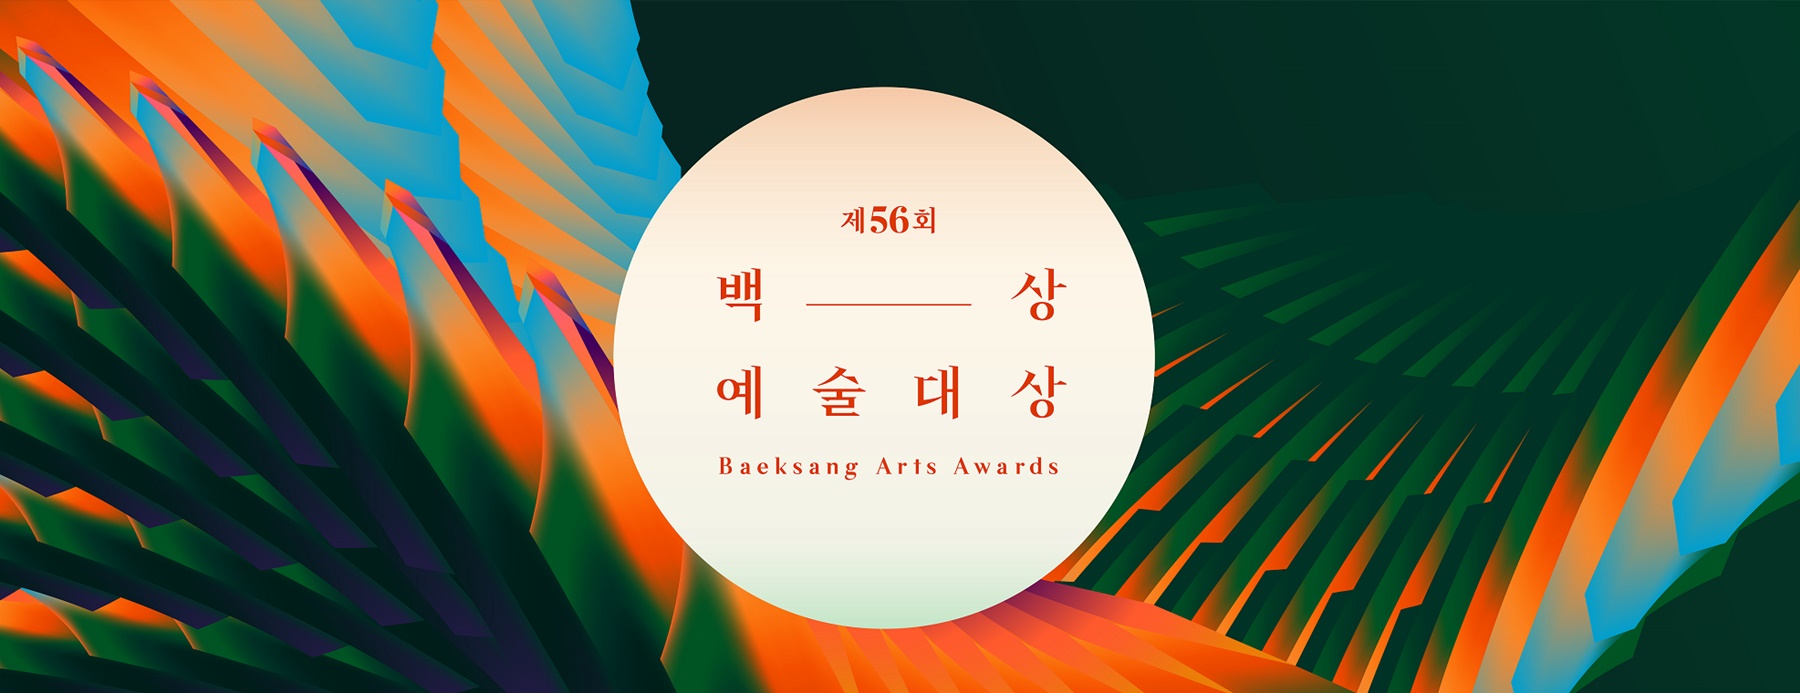 The 56th Baeksang Arts Awards will be live simultaneously at 4:50 pm today, JTBC2, and JTBC4.Also, it will be re-broadcasted on JTBC4 at 8 p.m. on the day immediately after live broadcasts (on the 5th) and at 11 a.m. on Saturday, the 6th, the following day.Baeksang Arts Awards are the only comprehensive arts awards ceremony in Korea that includes TV and movies. This year, considering the situation of Corona 19, it will be held at KINTEX 7 Hall in Ilsan, Gyeonggi Province.Meanwhile, red carpet and winner backstage interviews can be found live on the global short video application TikTok.iMBC Cha Hye-mi  Photos